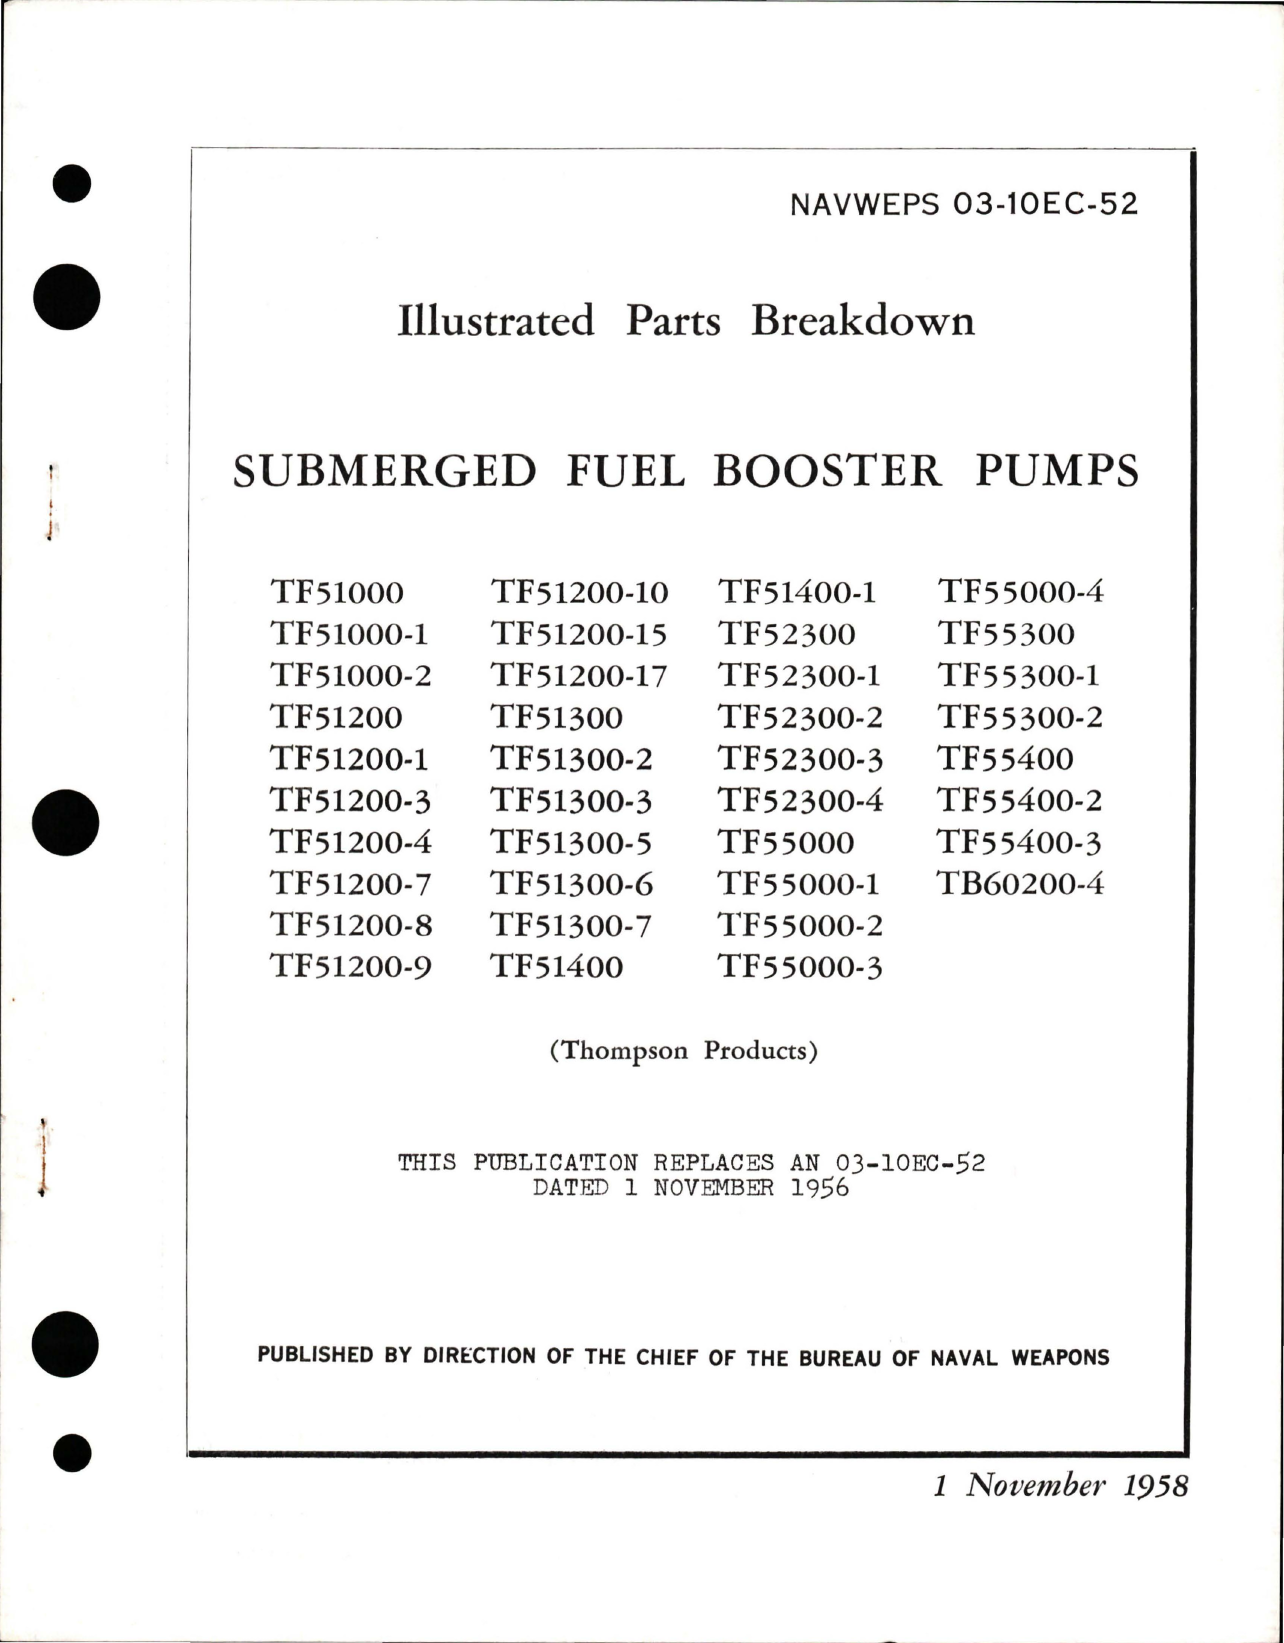 Sample page 1 from AirCorps Library document: Illustrated Parts Breakdown for Submerged Fuel Booster Pumps